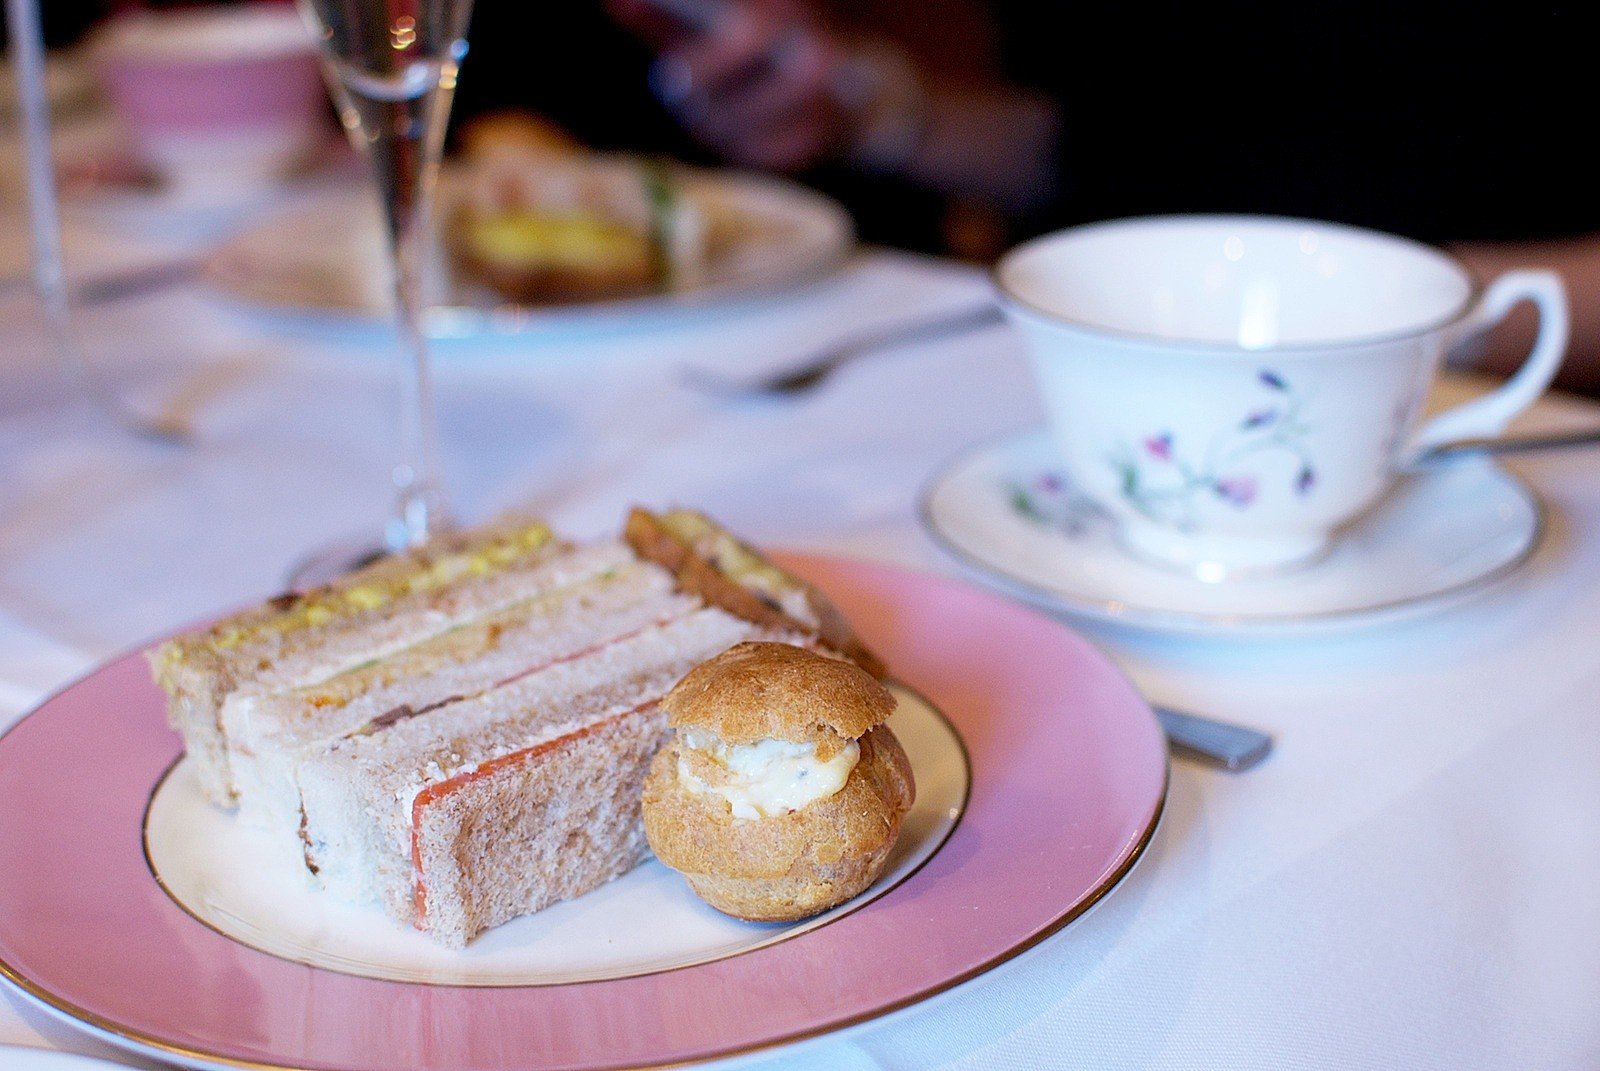 Afternoon Tea at The Royal Horseguards Hotel in London